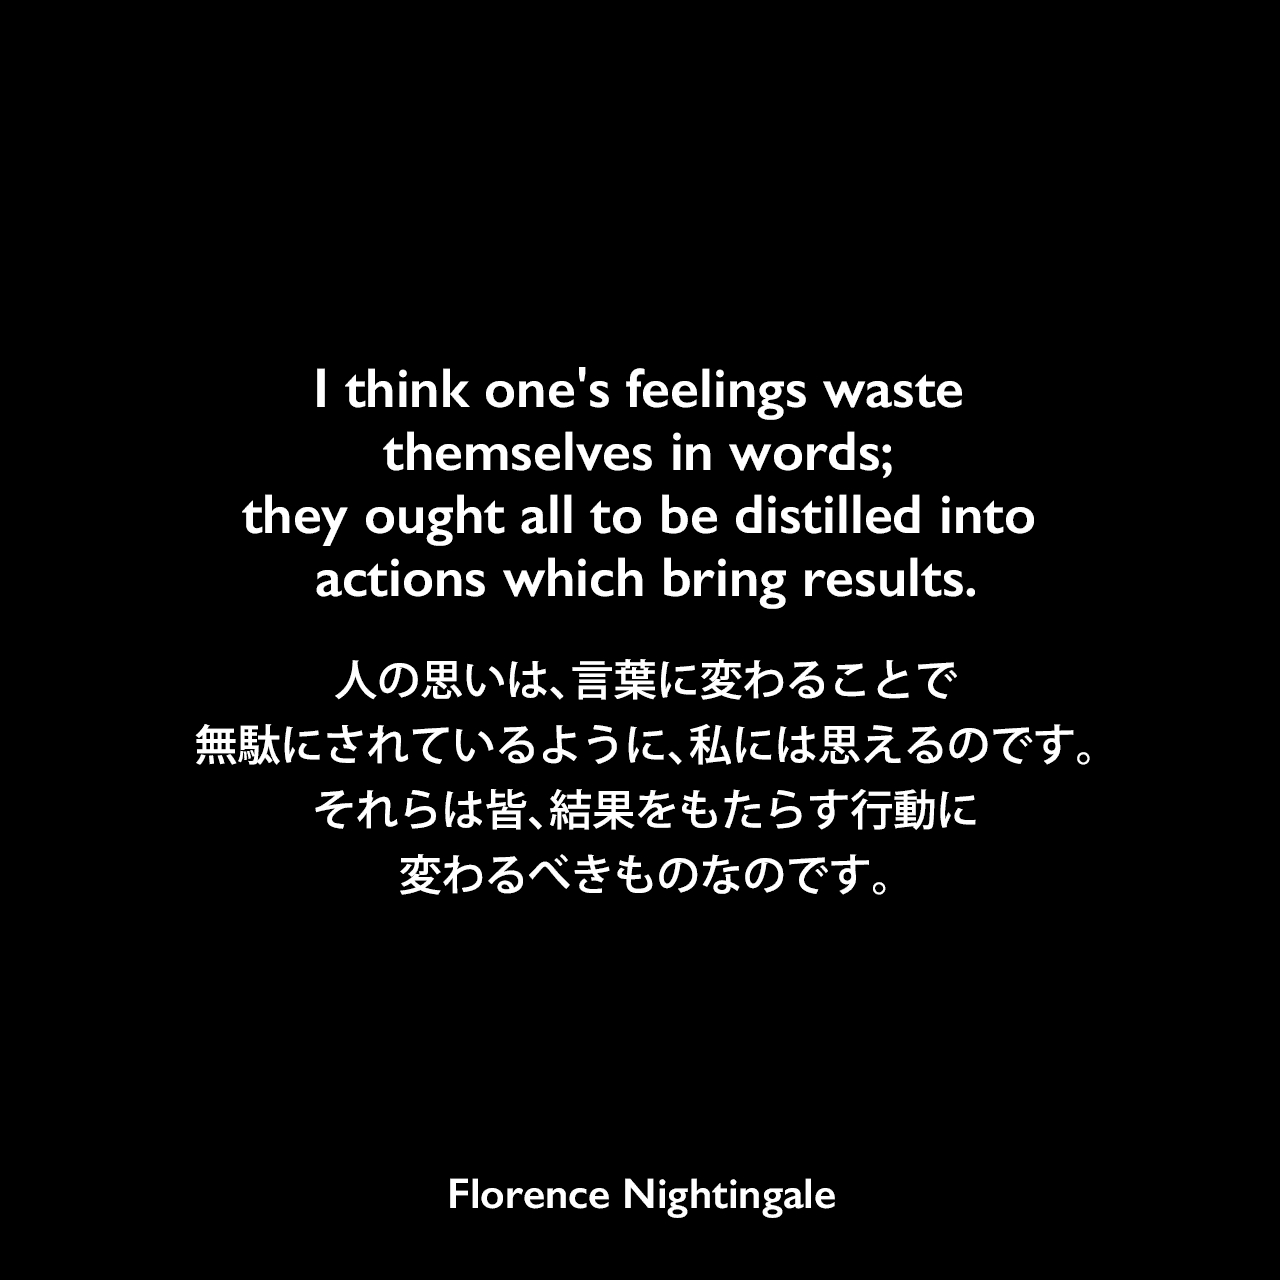 I think one's feelings waste themselves in words; they ought all to be distilled into actions which bring results.人の思いは、言葉に変わることで無駄にされているように、私には思えるのです。それらは皆、結果をもたらす行動に変わるべきものなのです。- 友人に宛てた手紙よりFlorence Nightingale